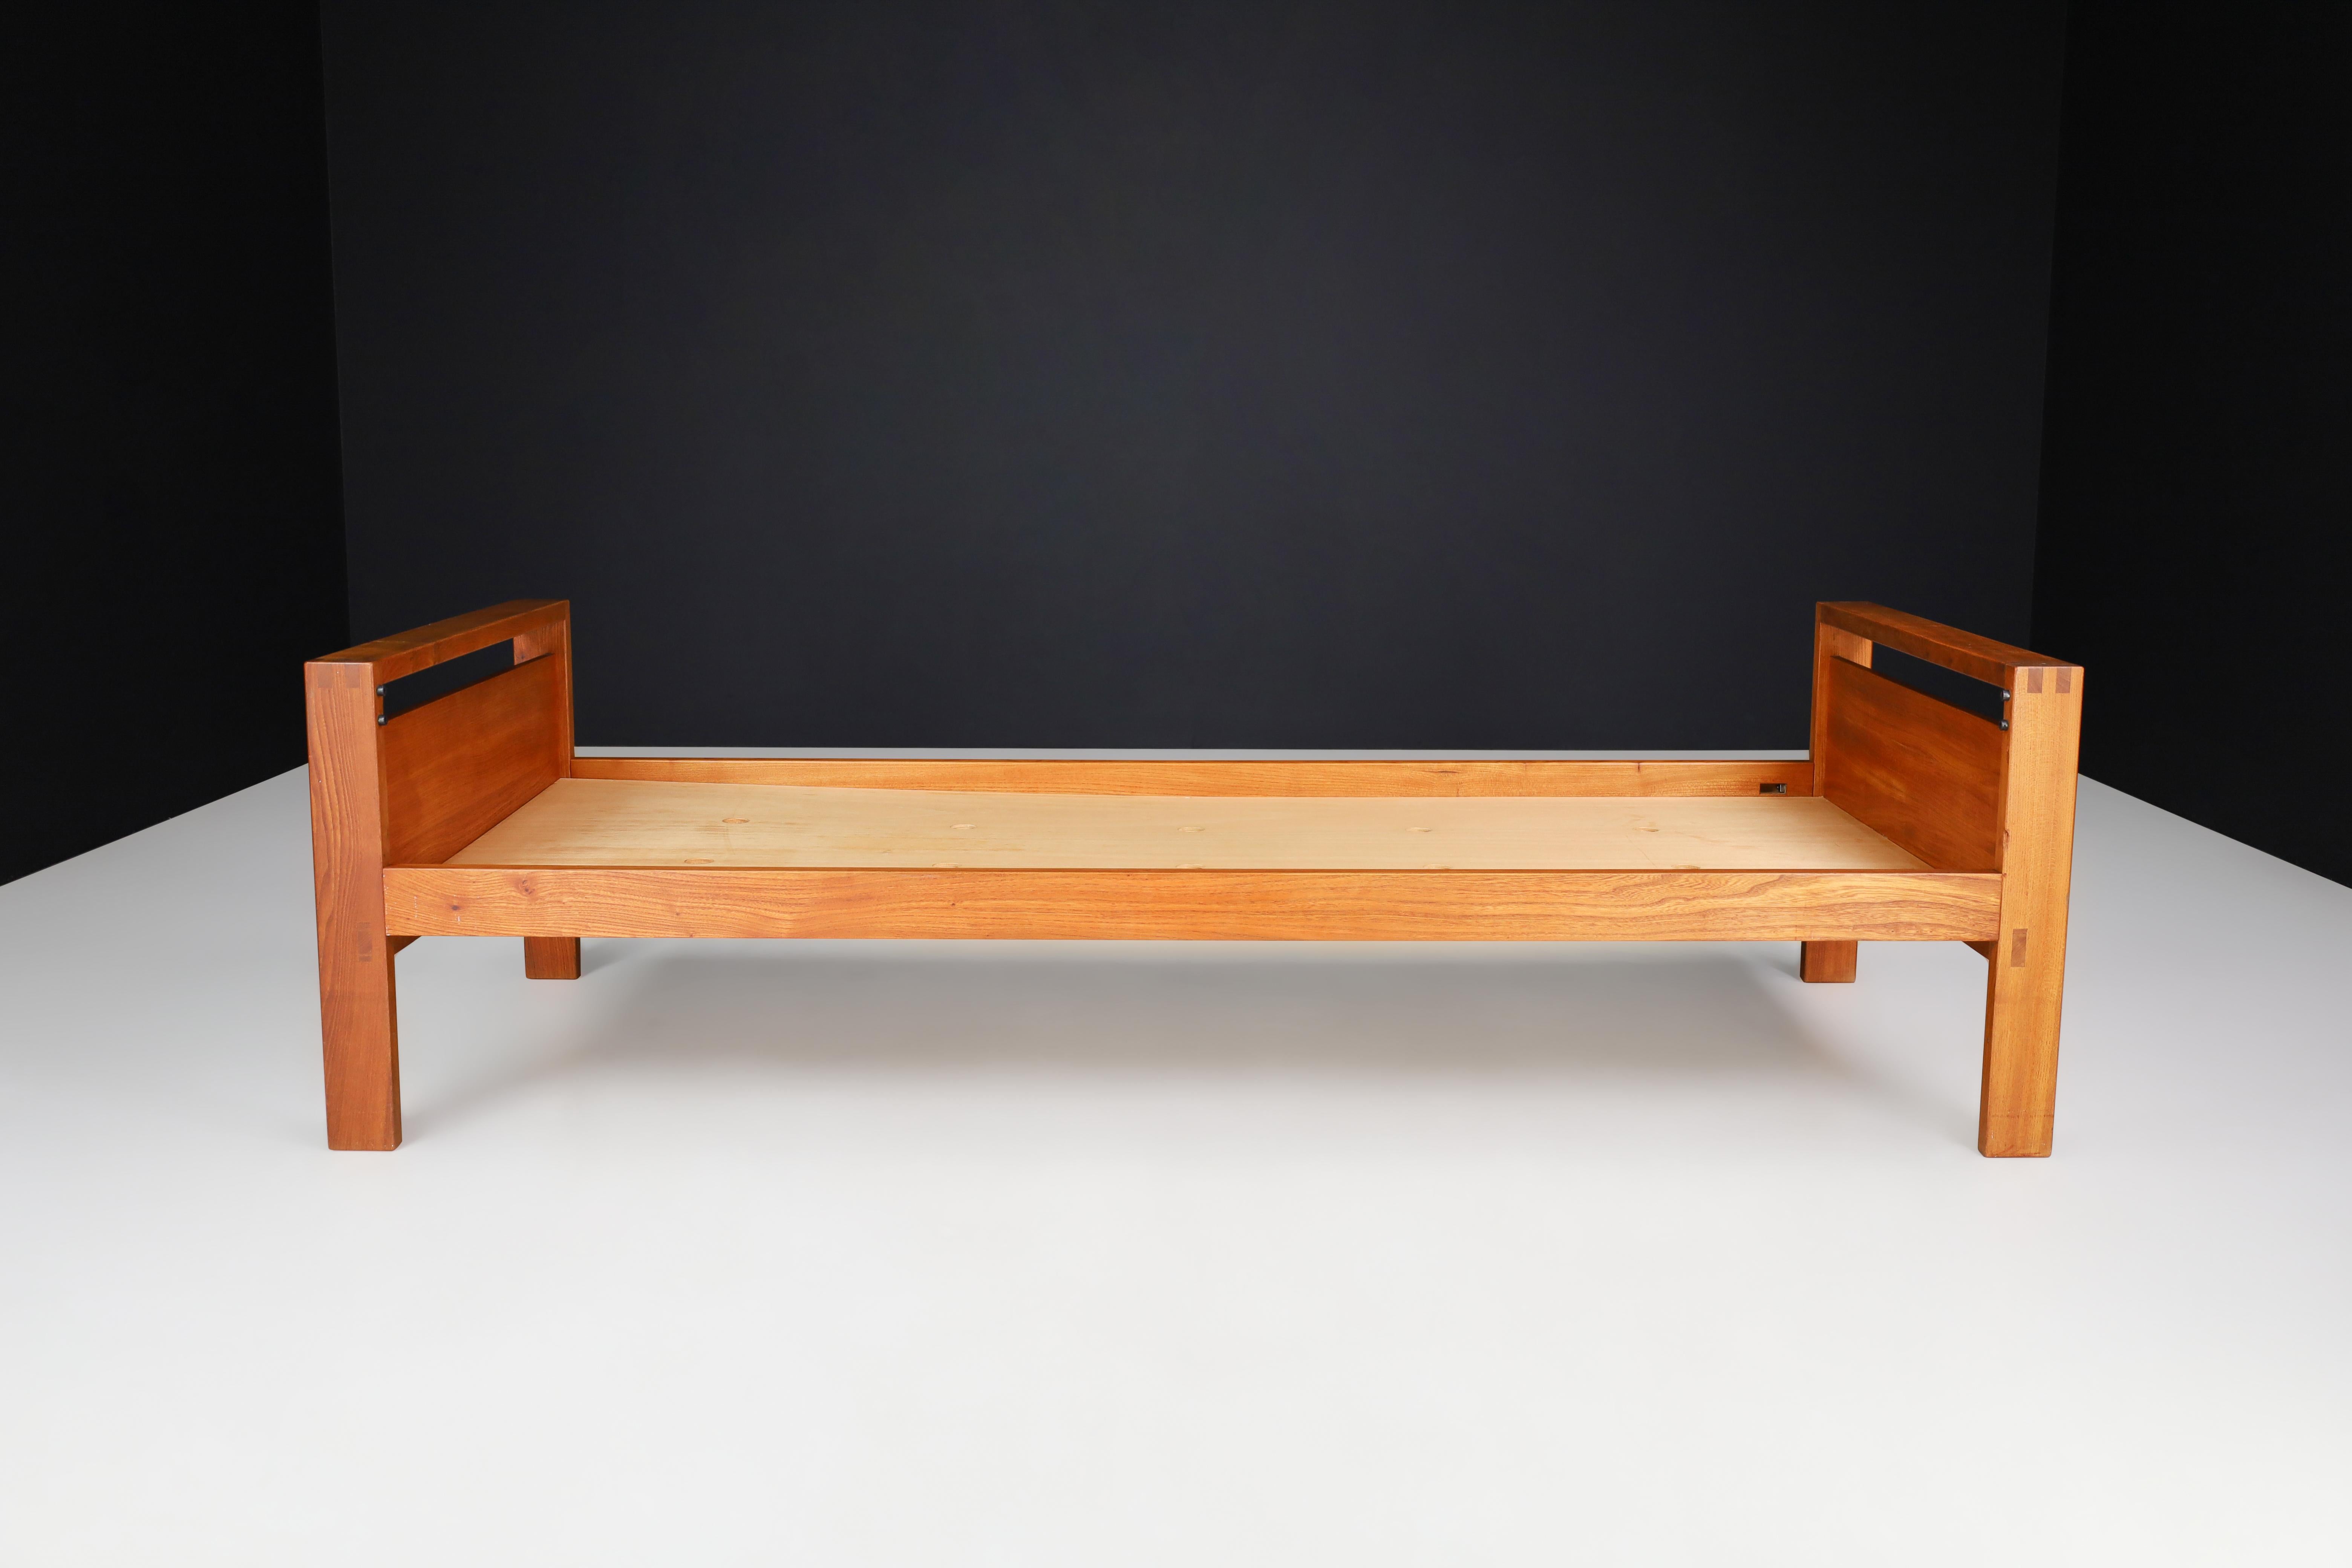 Midcentury Pierre Chapo Lo6a Bed, Daybed in Solid Elm Wood, France, 1960s For Sale 4